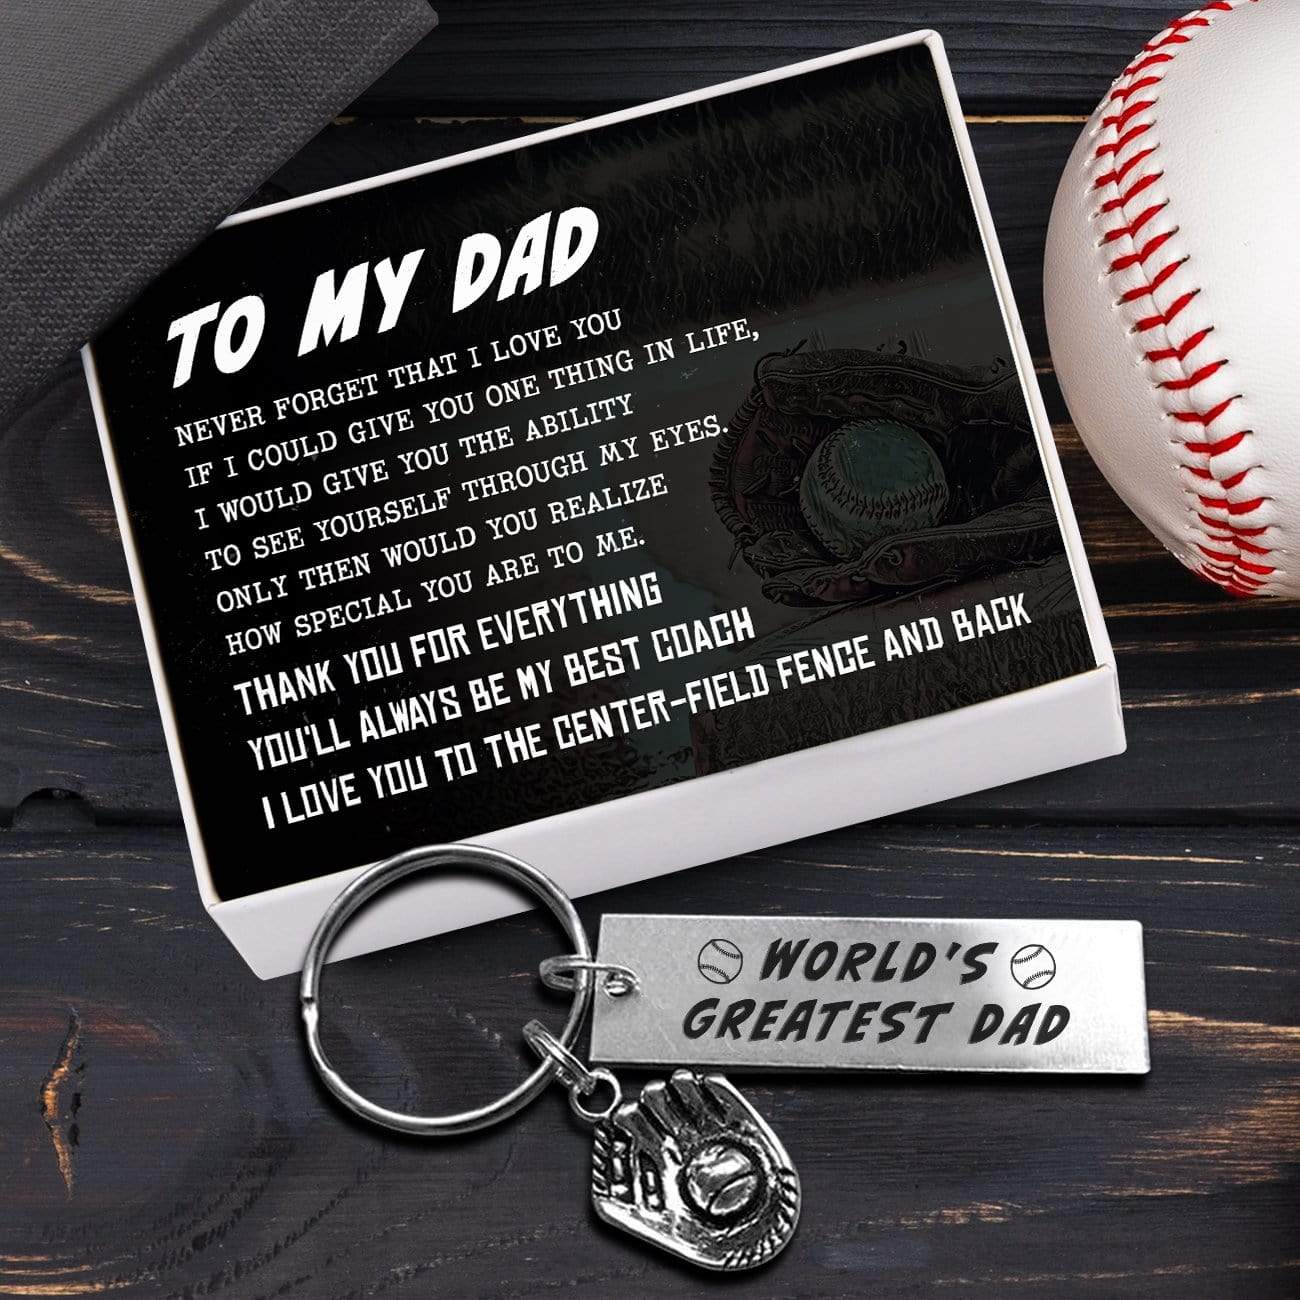 Baseball Glove Keychain - Baseball - To My Dad - Thank You For Everything - Gkax18004